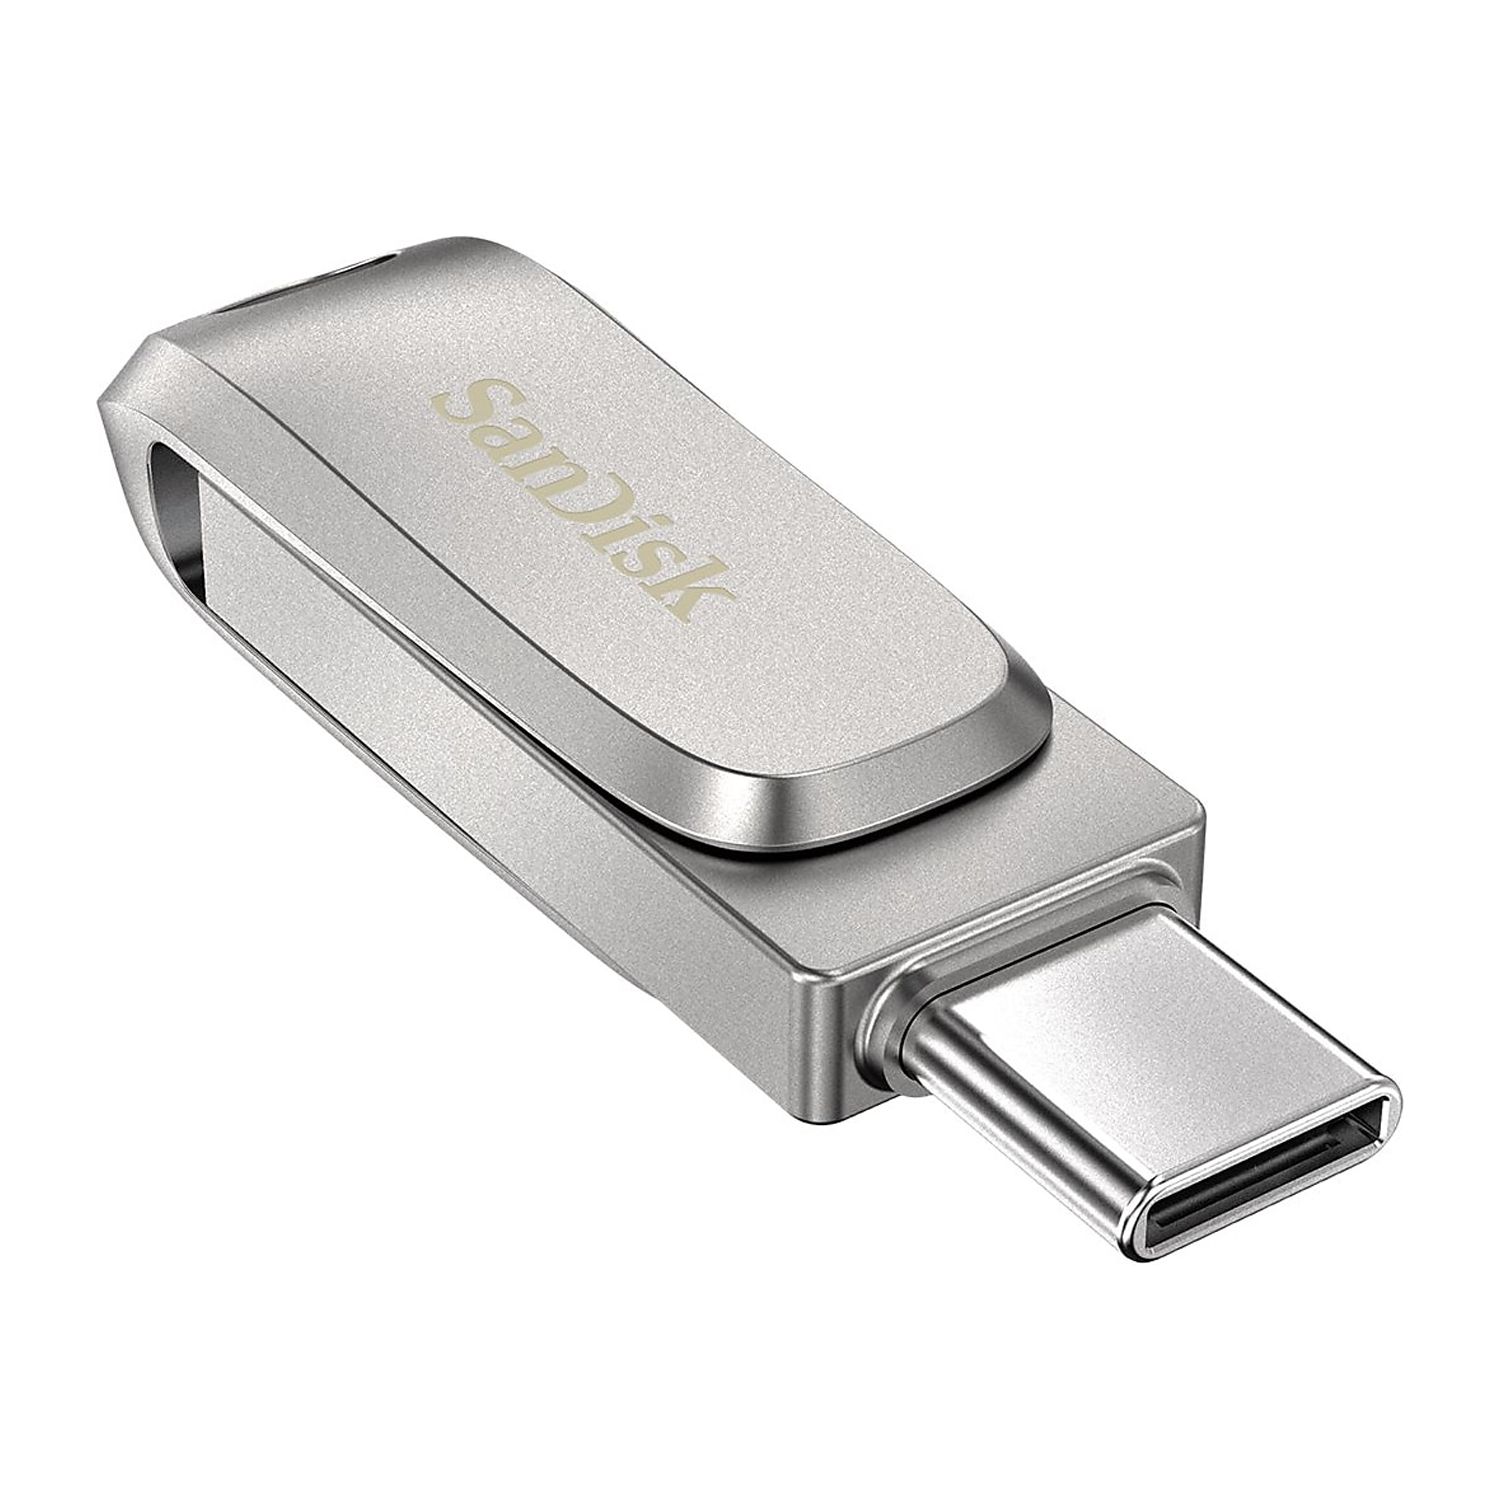 Sandisk SDDDC4-064G-A46 Type-C Ginseng Am USB 3.1 Flash Drive - image 5 of 5